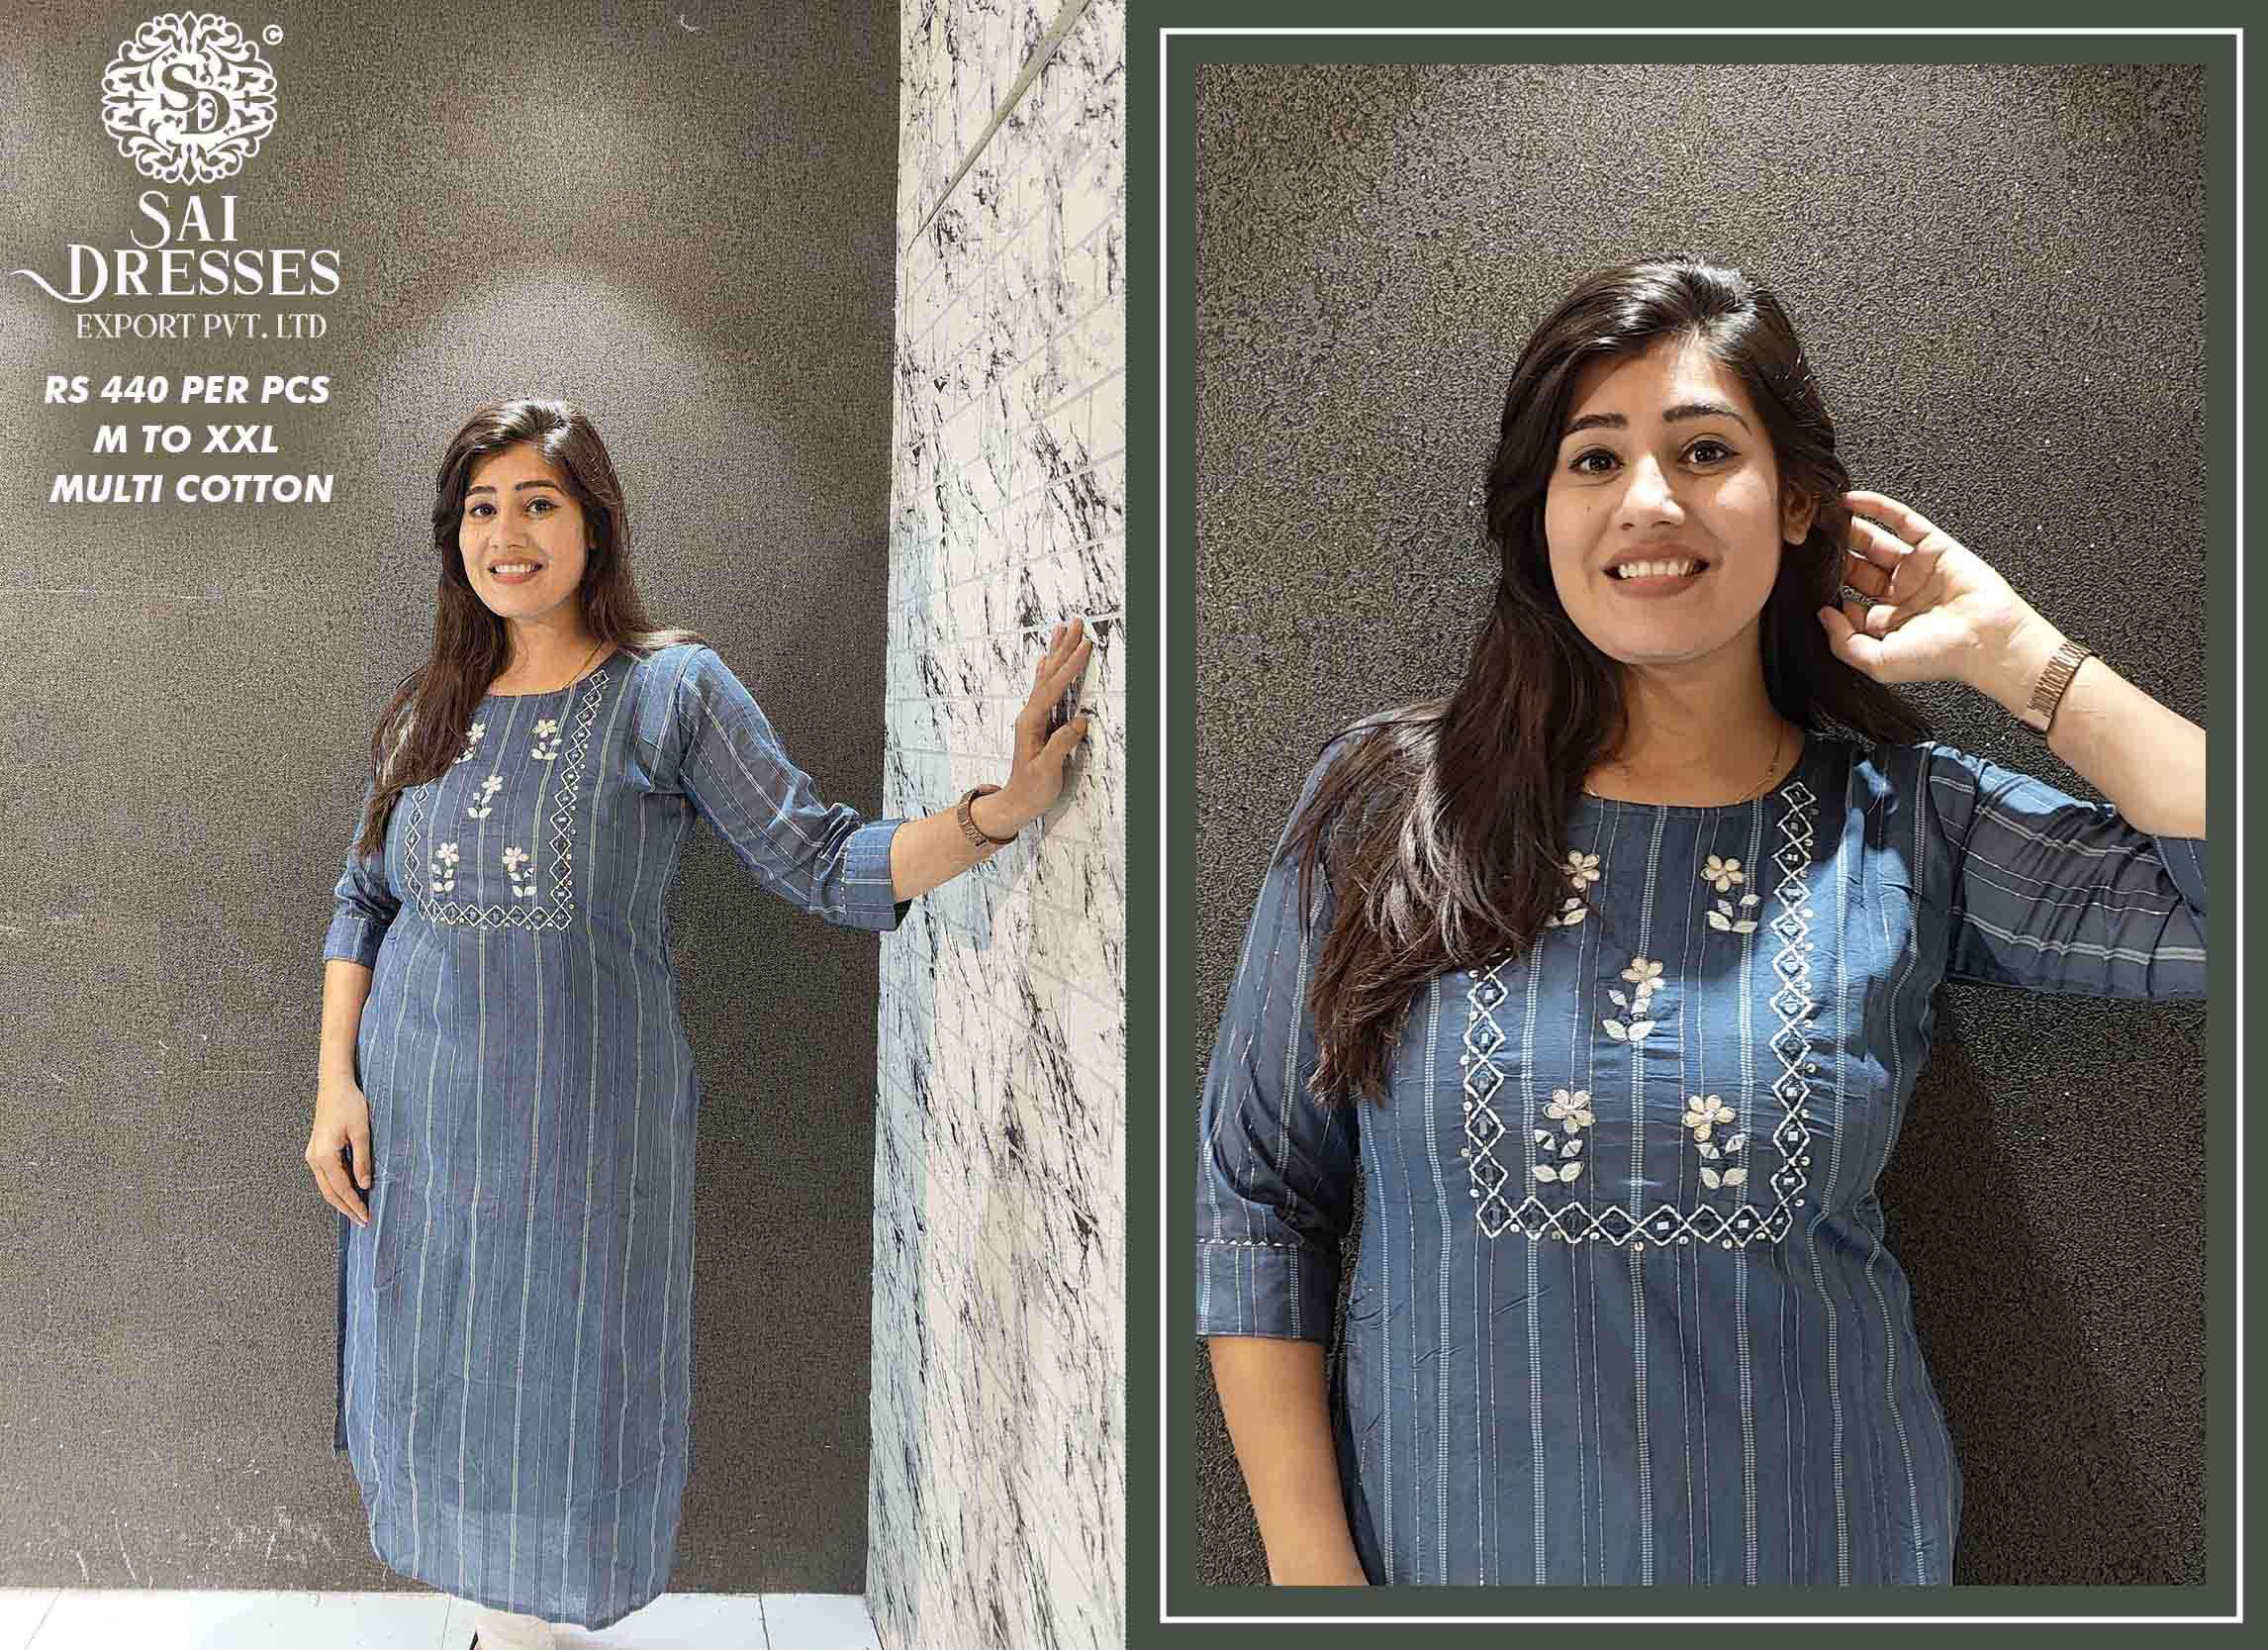 SAI DRESSES PRESENT D.NO SD38 READY TO WEAR EXCLUSIVE HANDWORK KURTI COMBO COLLECTION IN WHOLESALE RATE IN SURAT